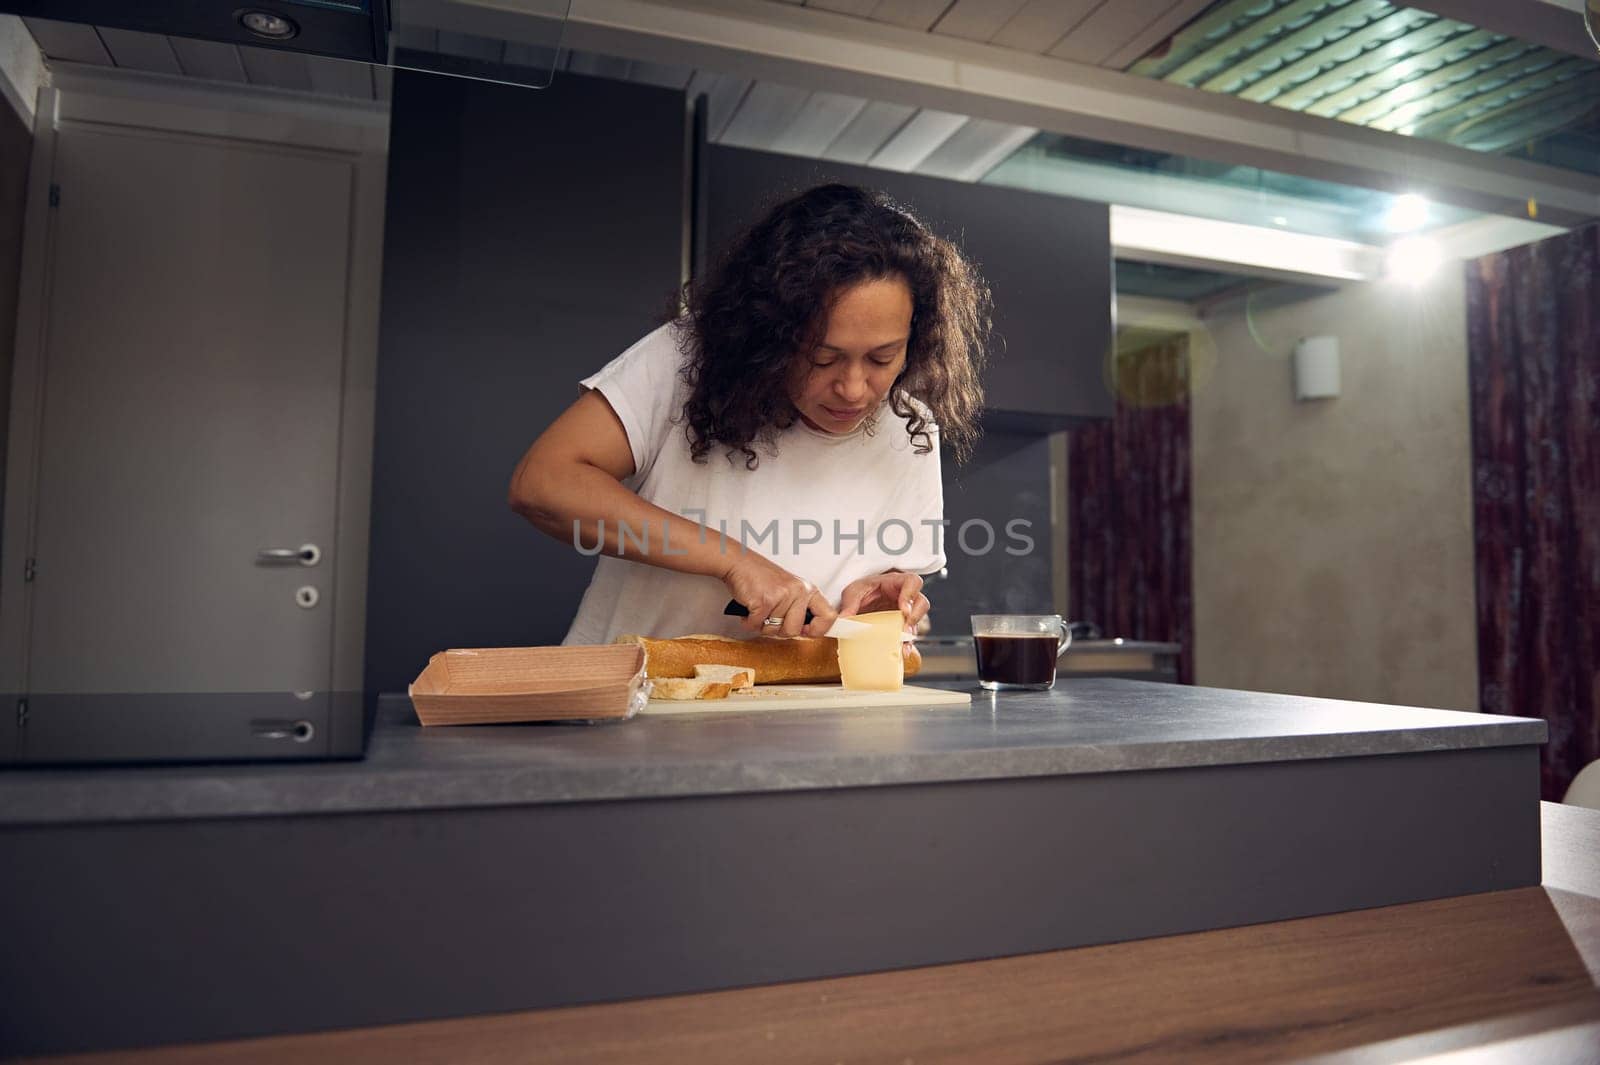 Curly haired multi ethnic adult woman slicing cheese on cutting board, using a kitchen knife, preparing sandwiches with a loaf of whole grain wholesome integral bread baguette for snack or breakfast